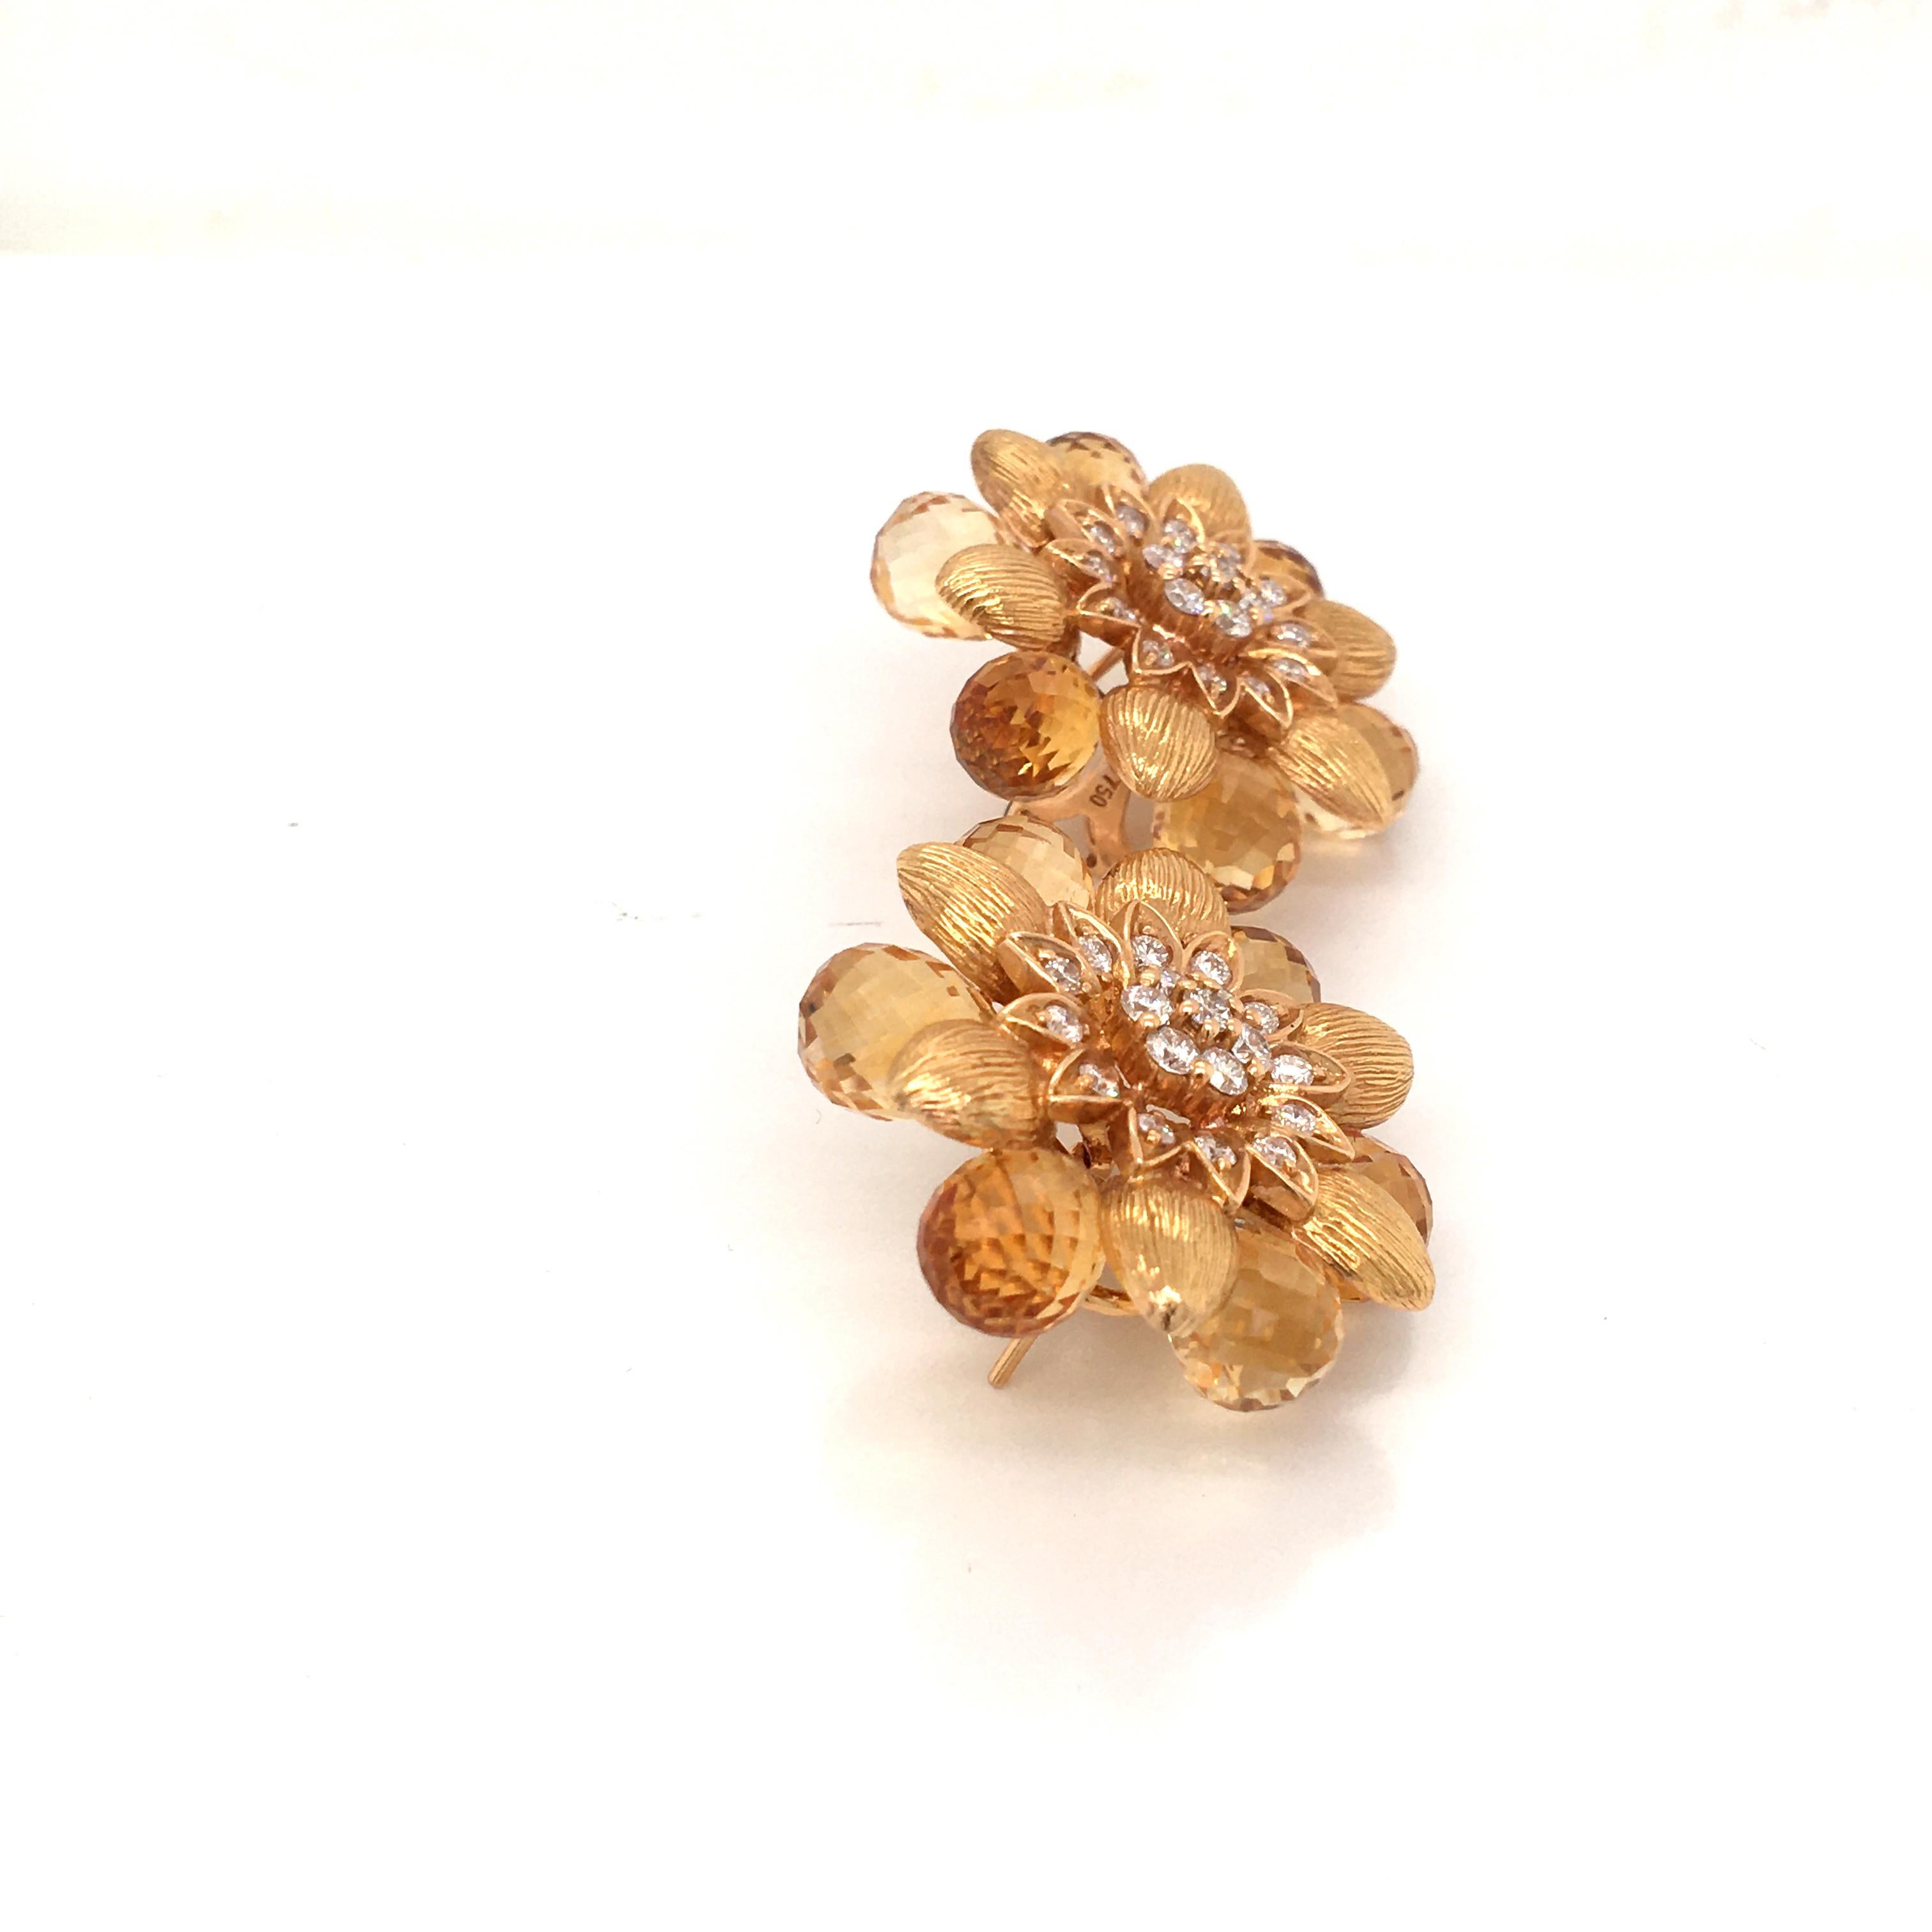 18 Karat yellow gold pair of earrings set with diamonds cts 1.44 color  G  clarity  VS  and sourranded by briolette cut citrine made in Italy come in a box.
very unique pair of earrings, alot of work to make this special design 
for pierced ears,